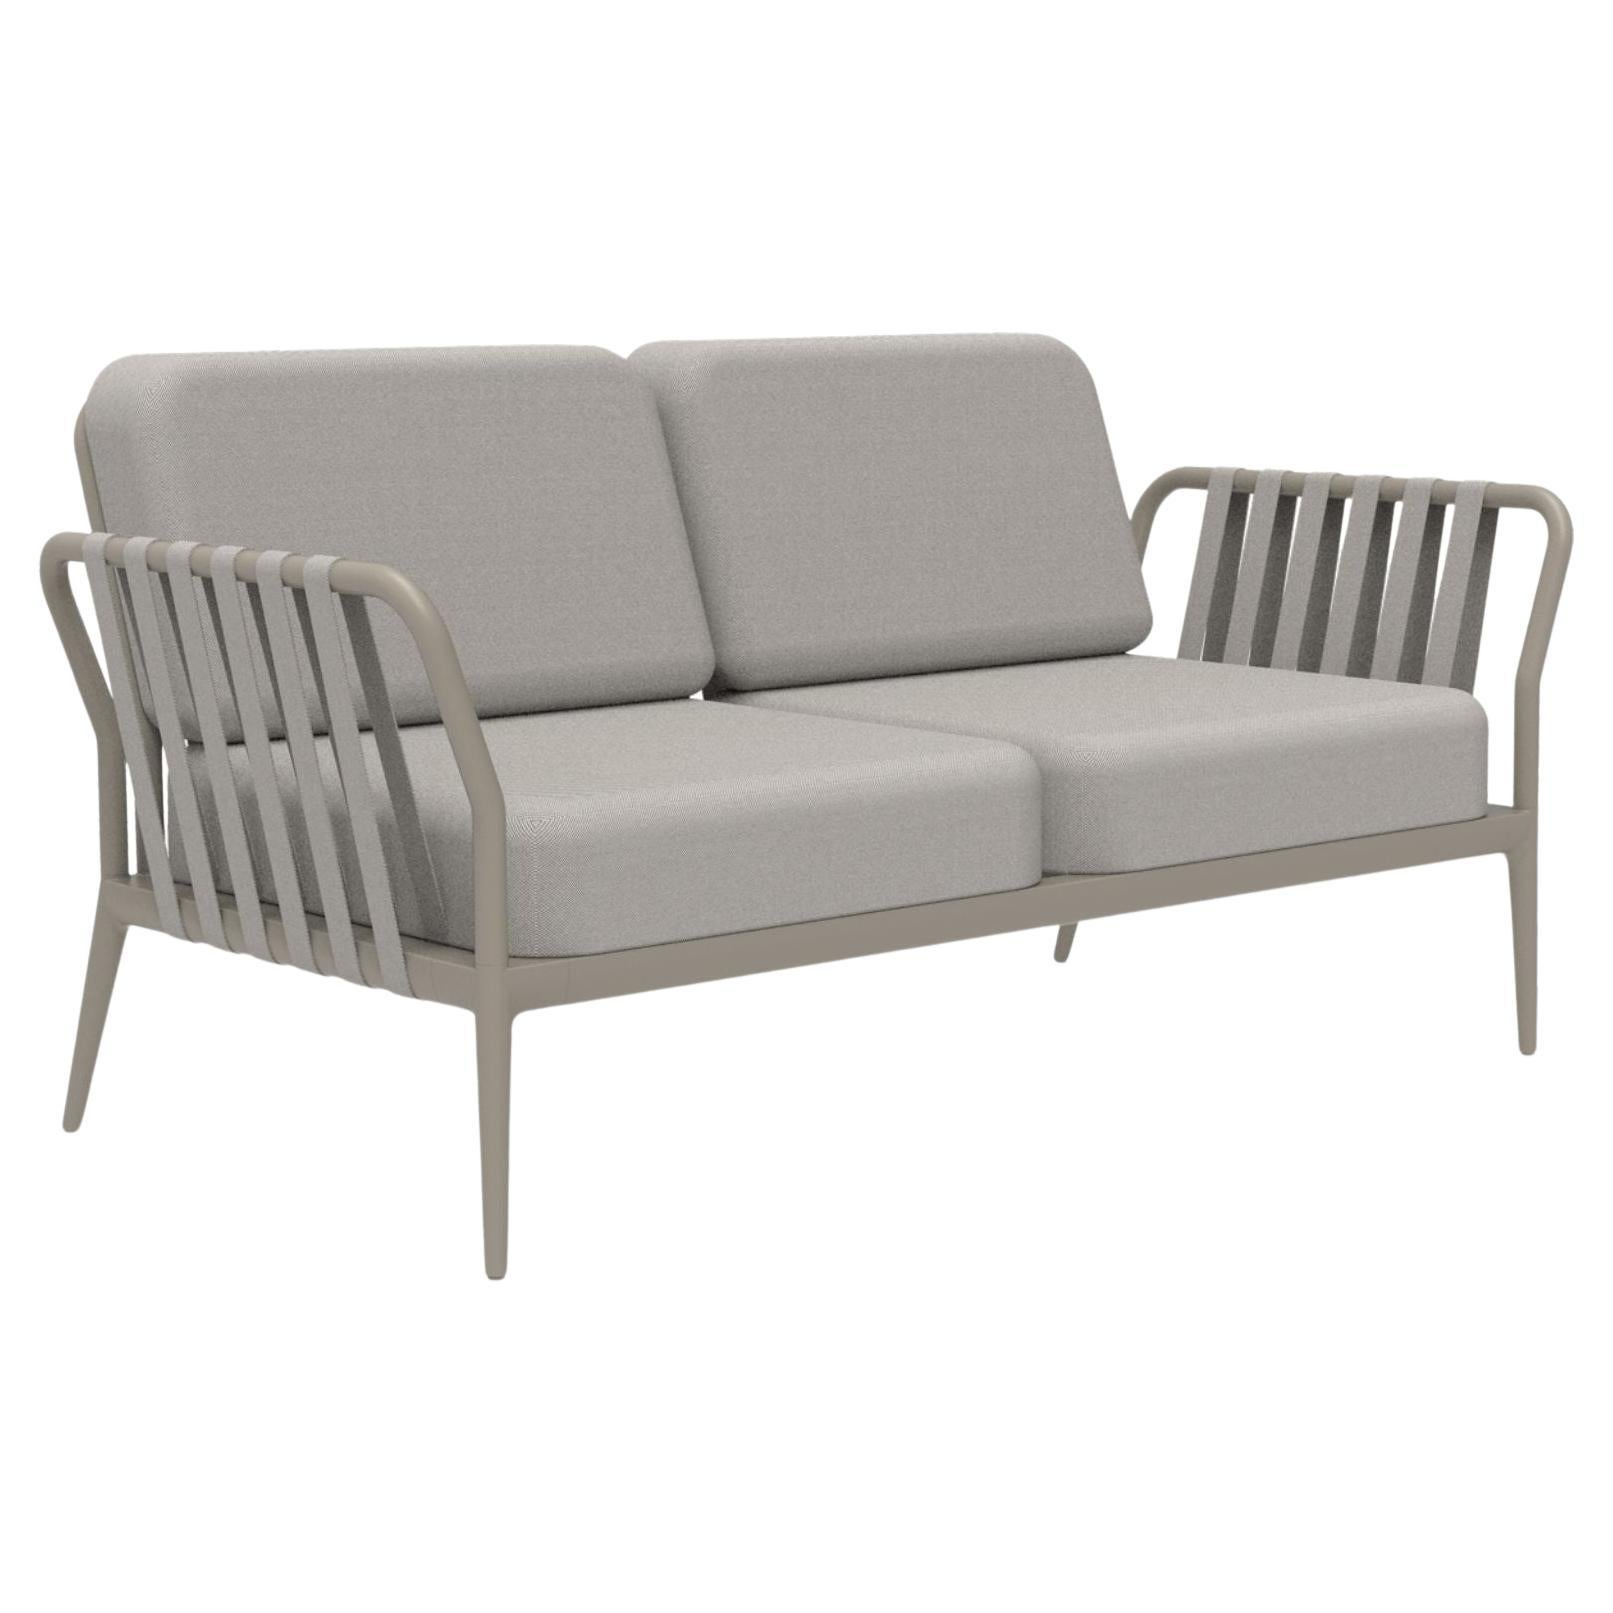 Ribbons Cream Sofa by Mowee For Sale